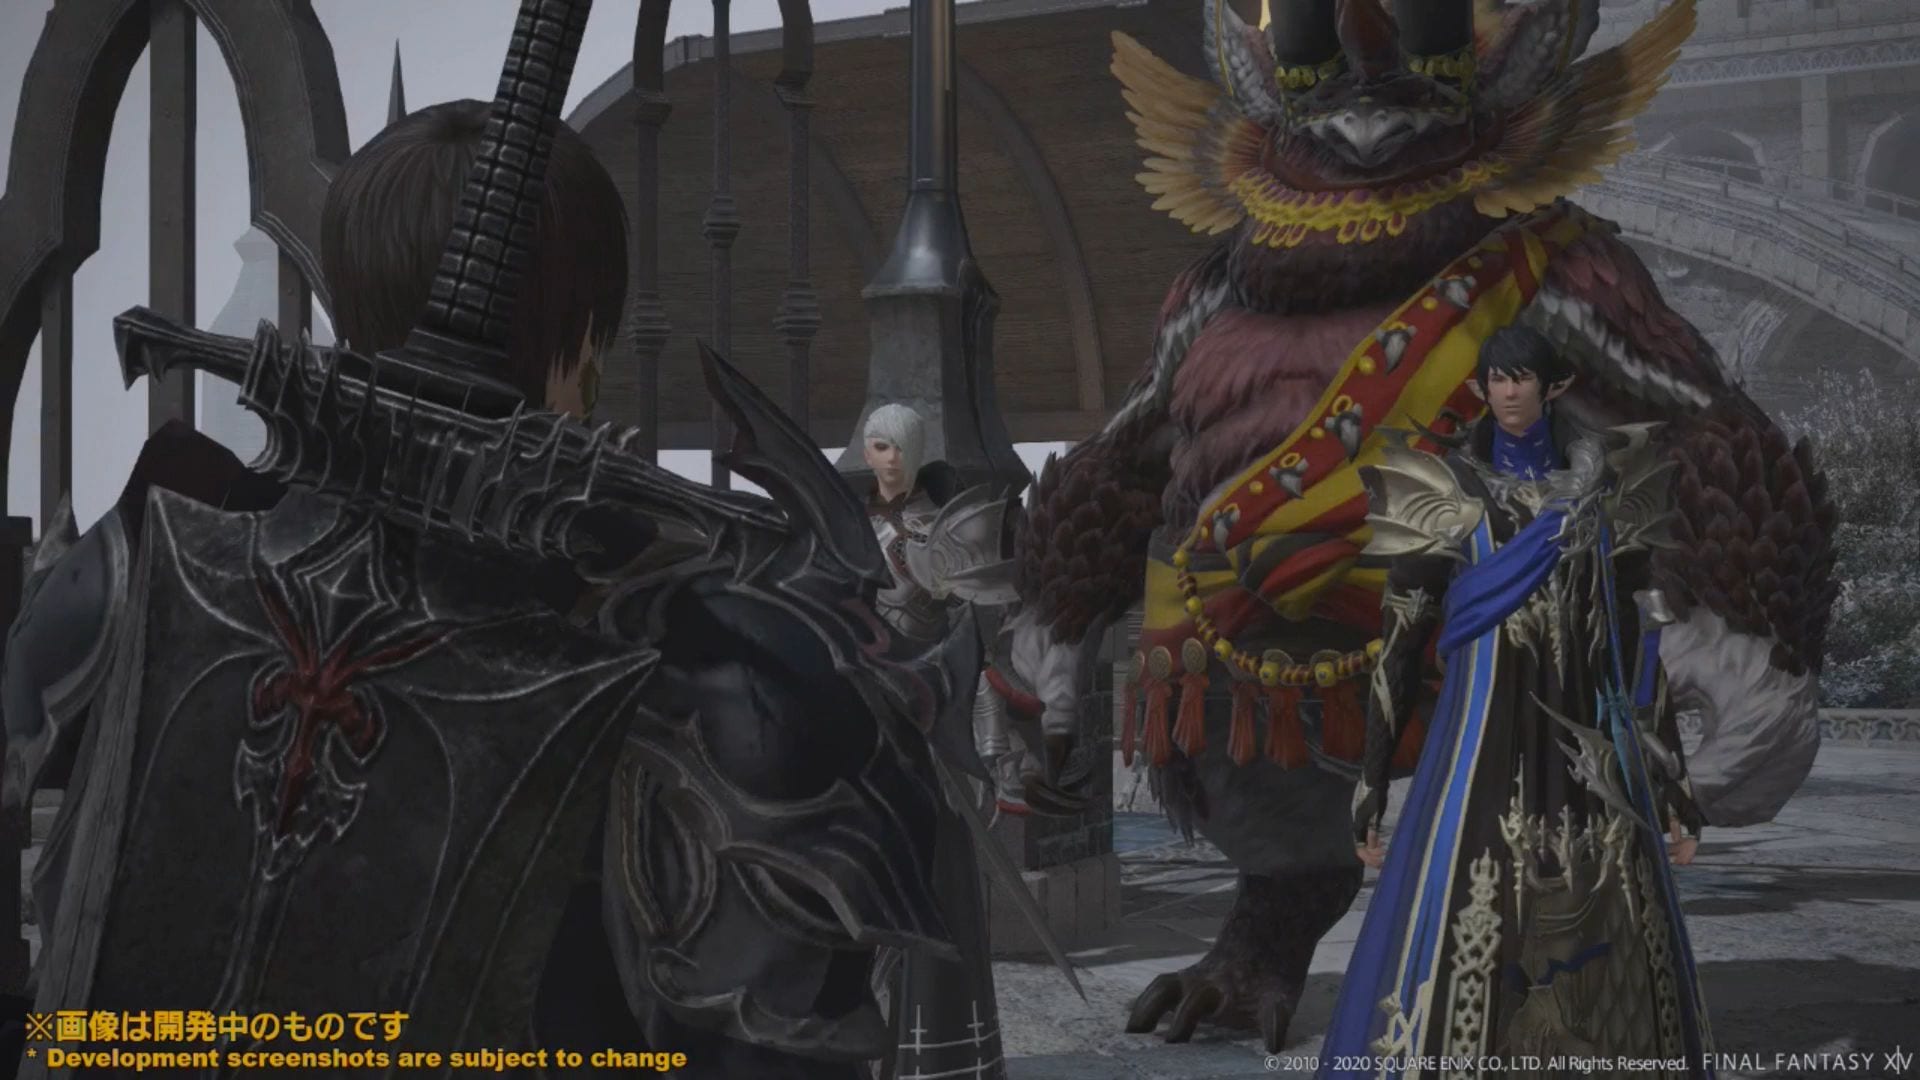 Final Fantasy Xiv Update 5 4 Announced For December Detailed Ps5 Compatibility Details Revealed